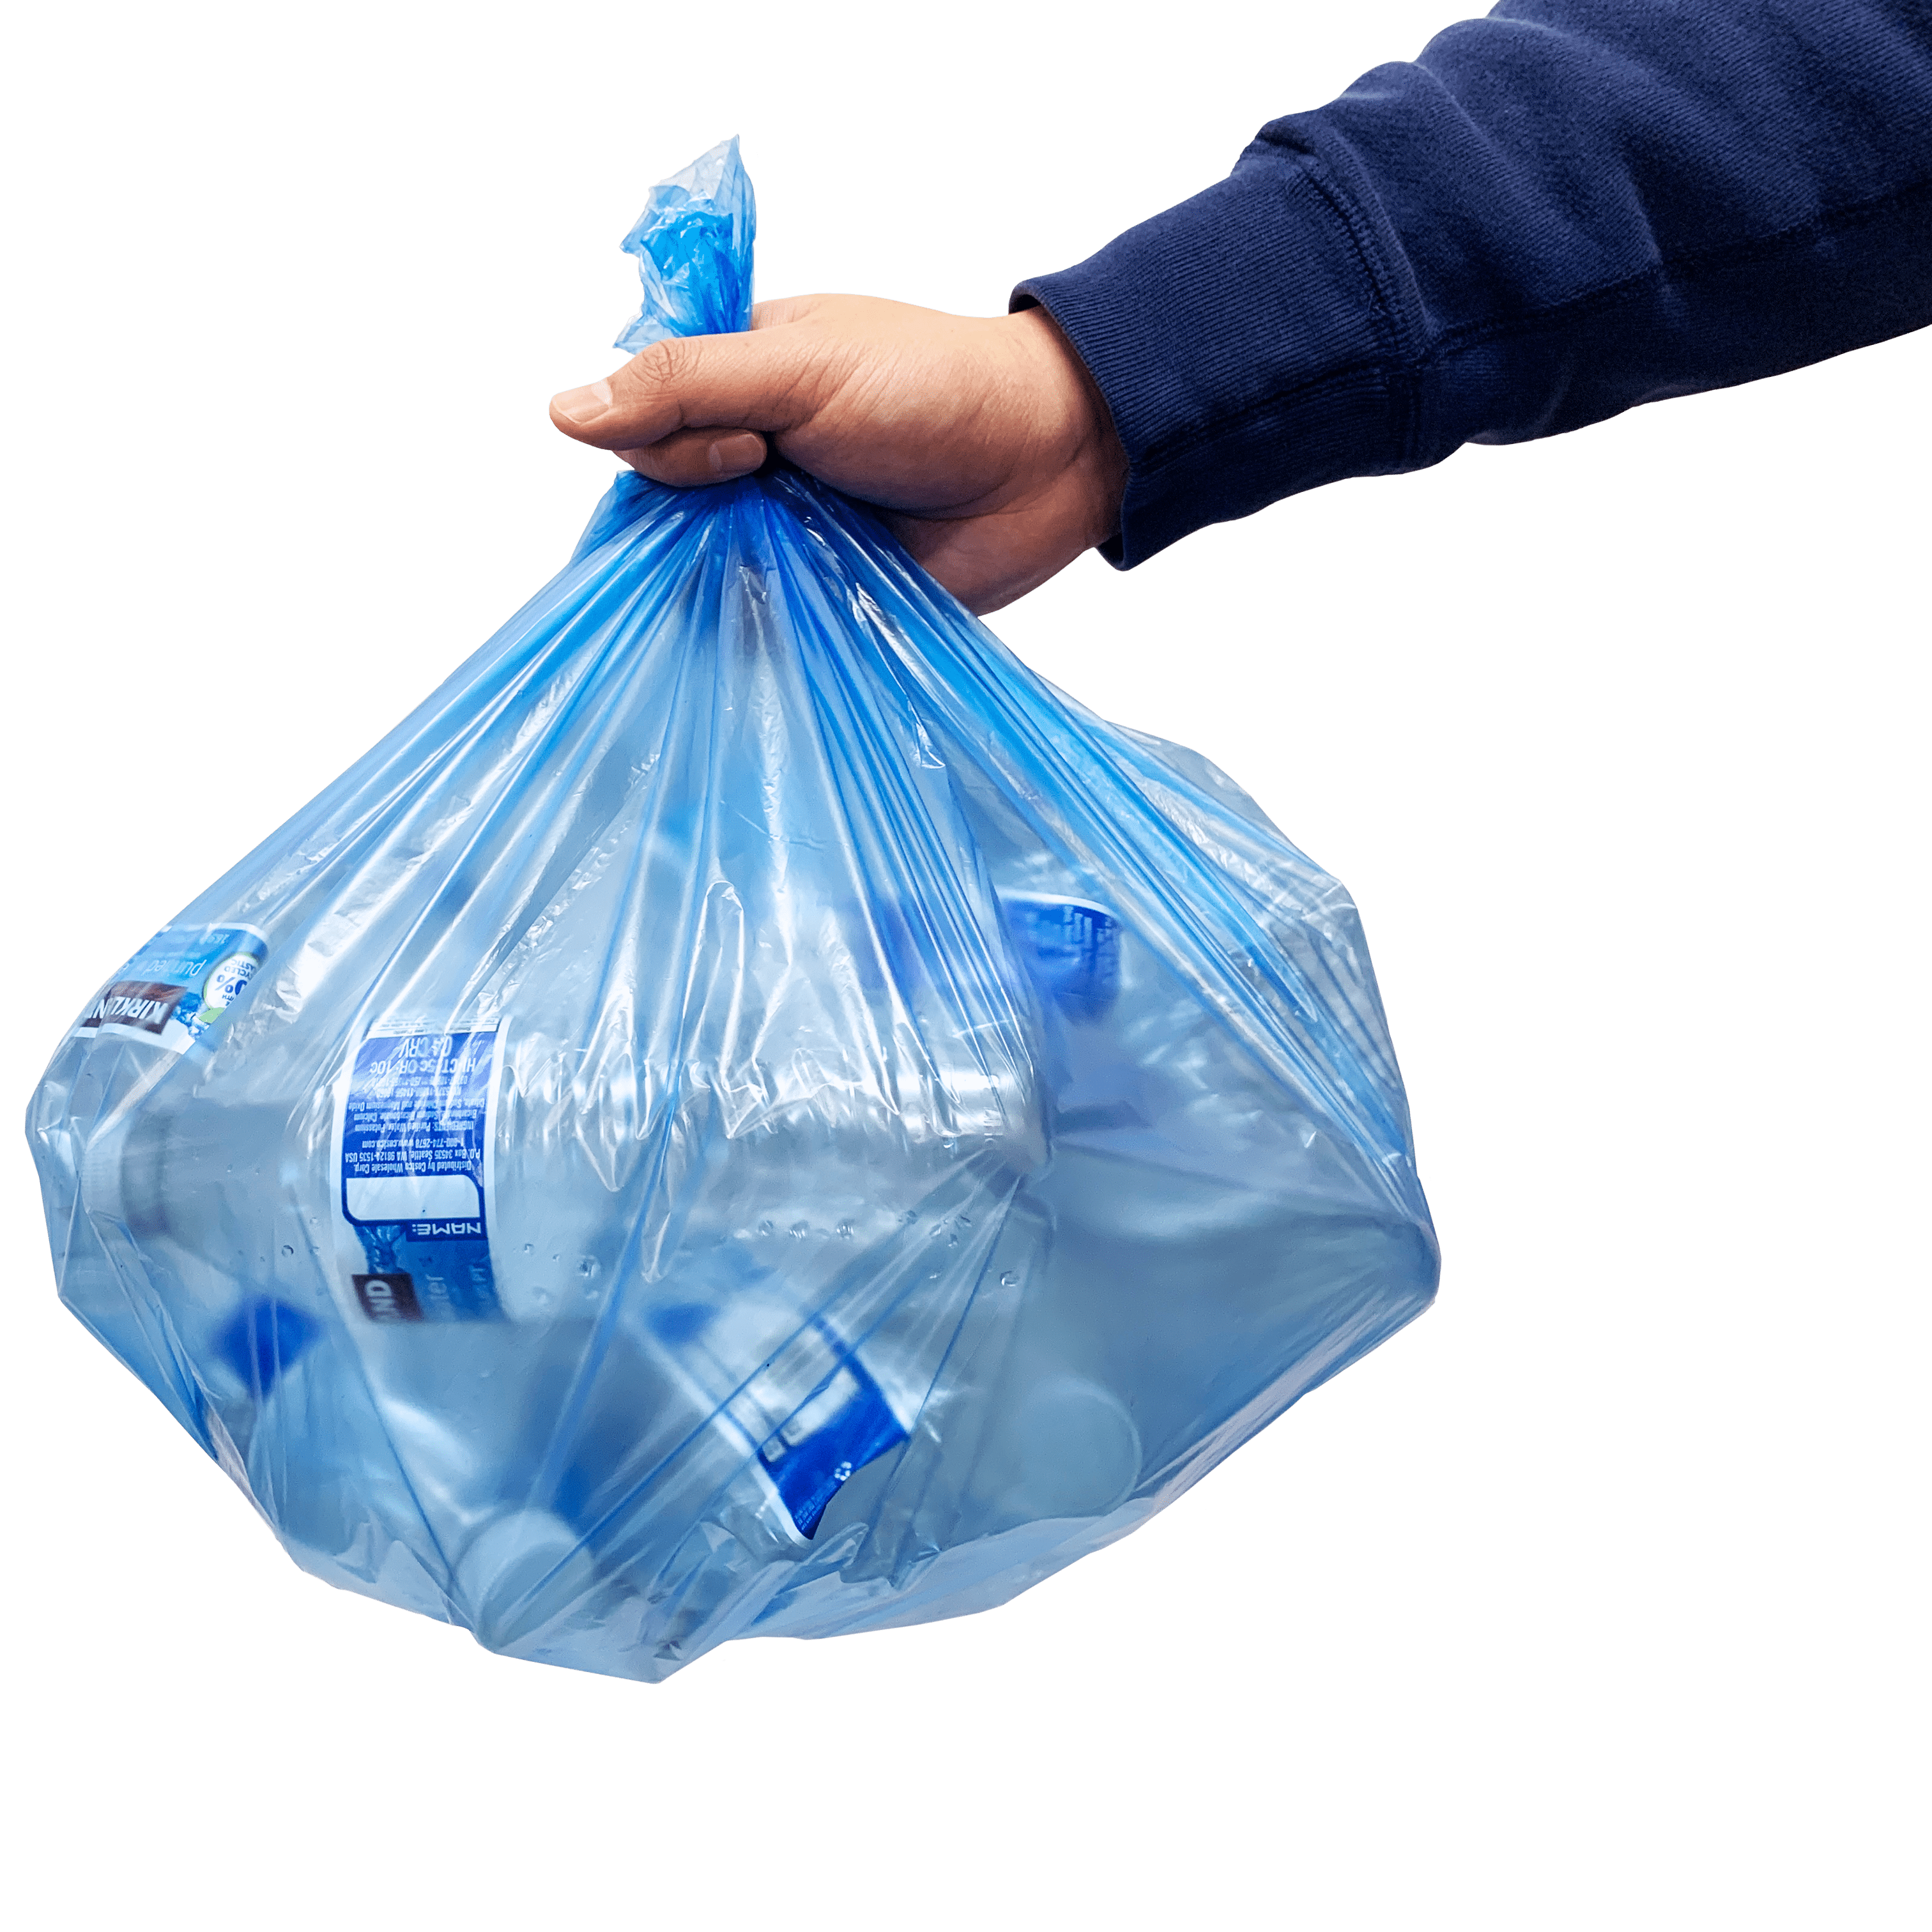 100 Counts / 5 Rolls 2-4 Gallon Small Trash Bags Waste Basket Liners Blue